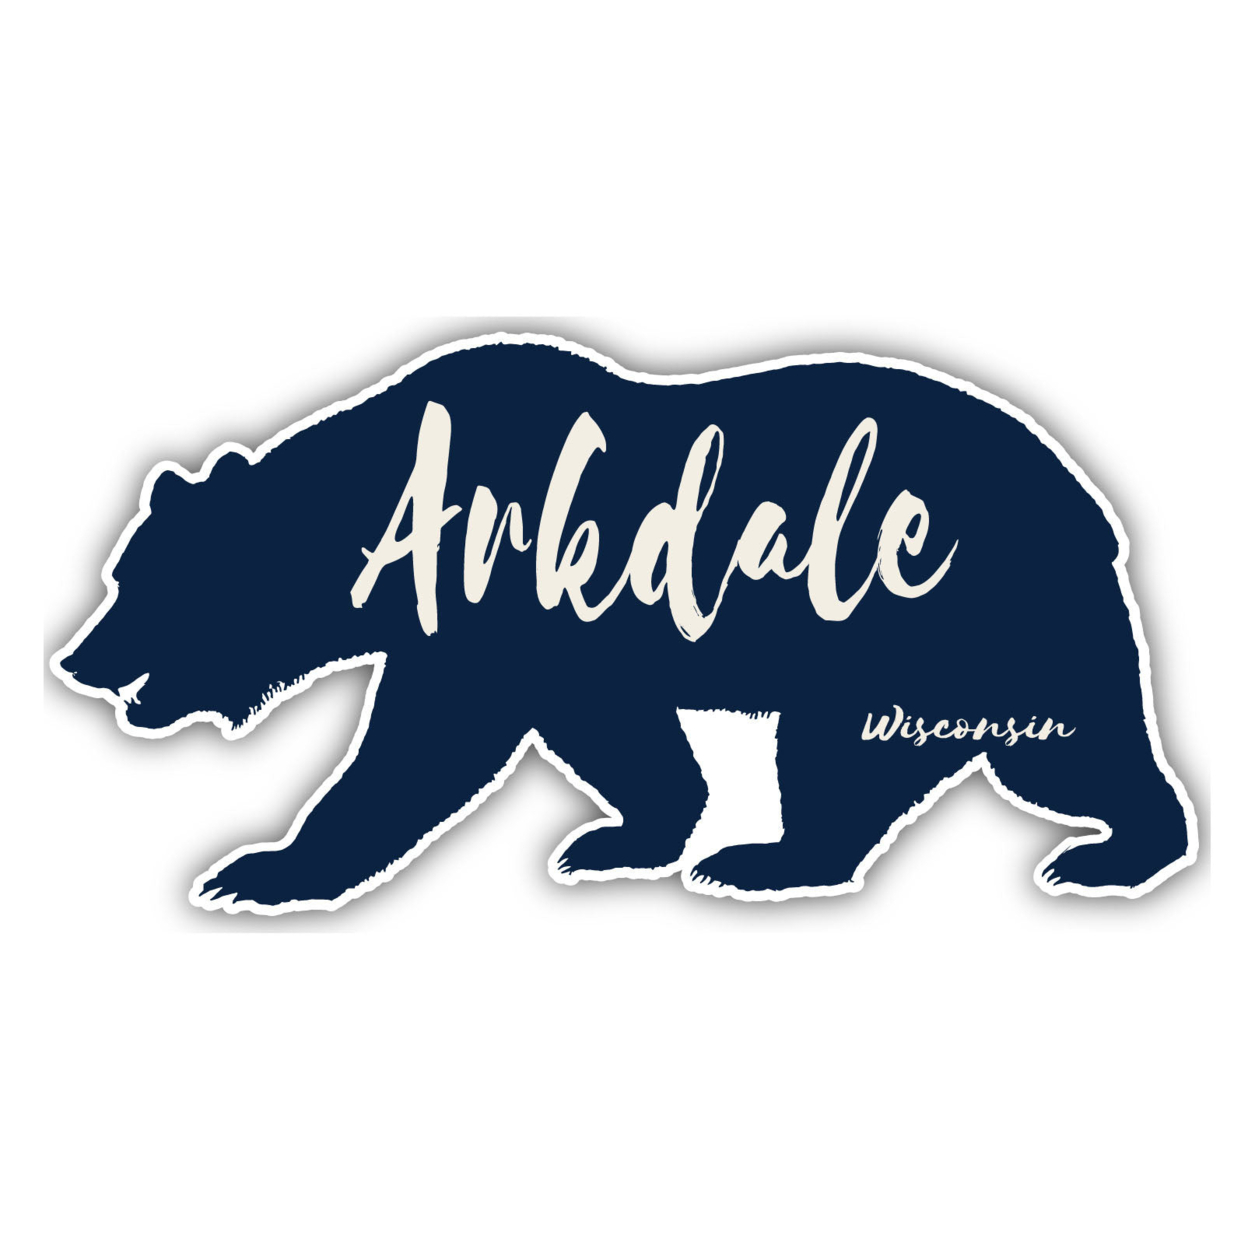 Arkdale Wisconsin Souvenir Decorative Stickers (Choose Theme And Size) - 4-Pack, 8-Inch, Bear